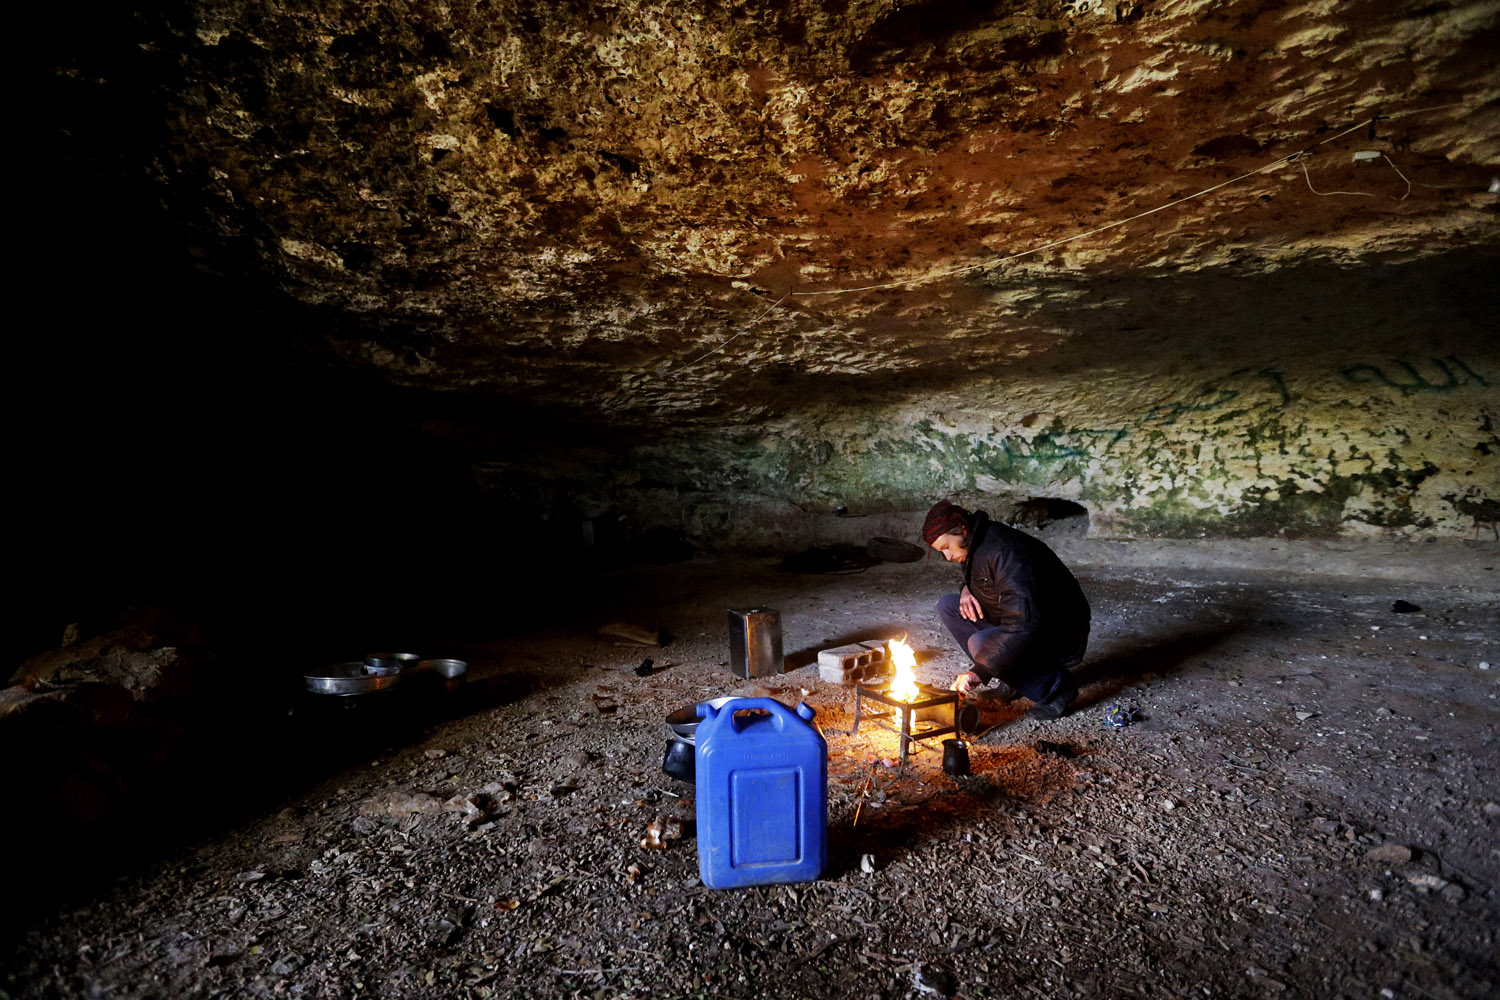 Feb. 24, 2013. A Free Syrian Army fighter prepares a fire to cook, inside a cave at Jabal al-Zaweya, in Idlib, Syria.